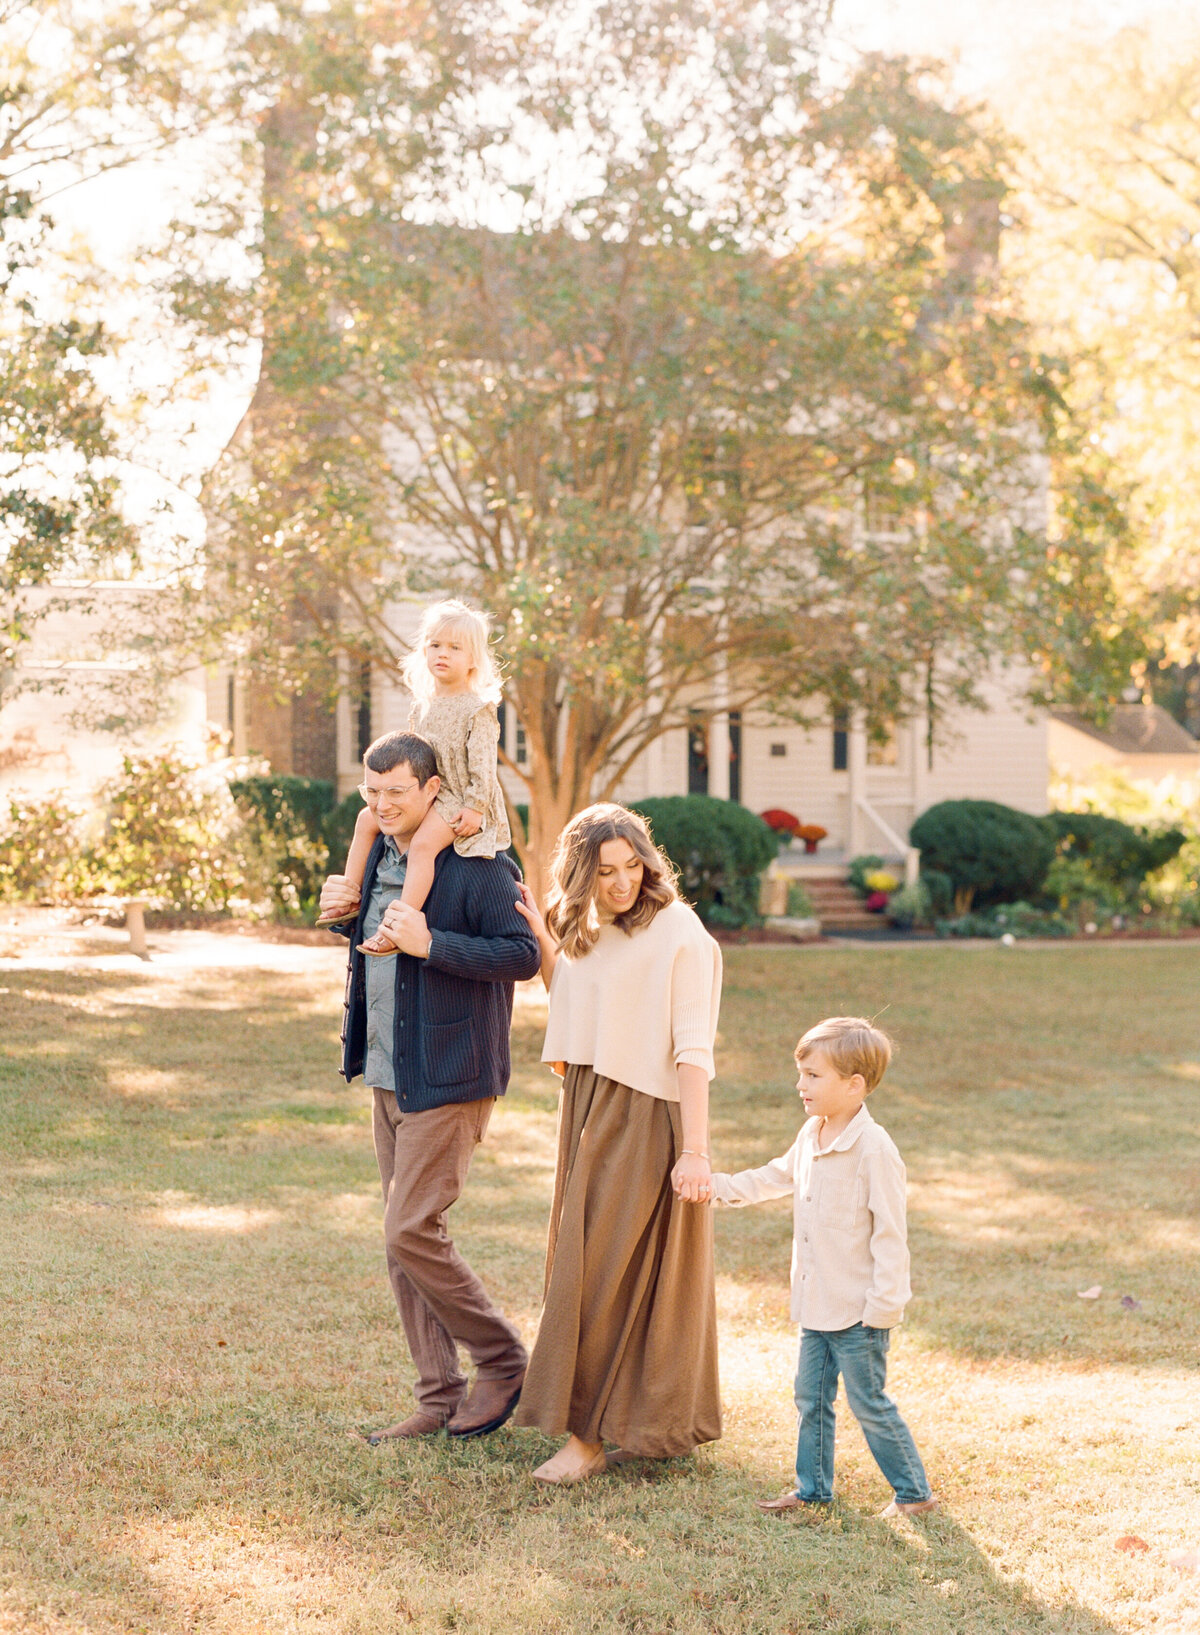 Family smiles and walks through a park in Wake Forest for family photos. Family walking during their family portrait session in Wake Forest, NC. Photographed by Raleigh family photographer A.J. Dunlap Photography.